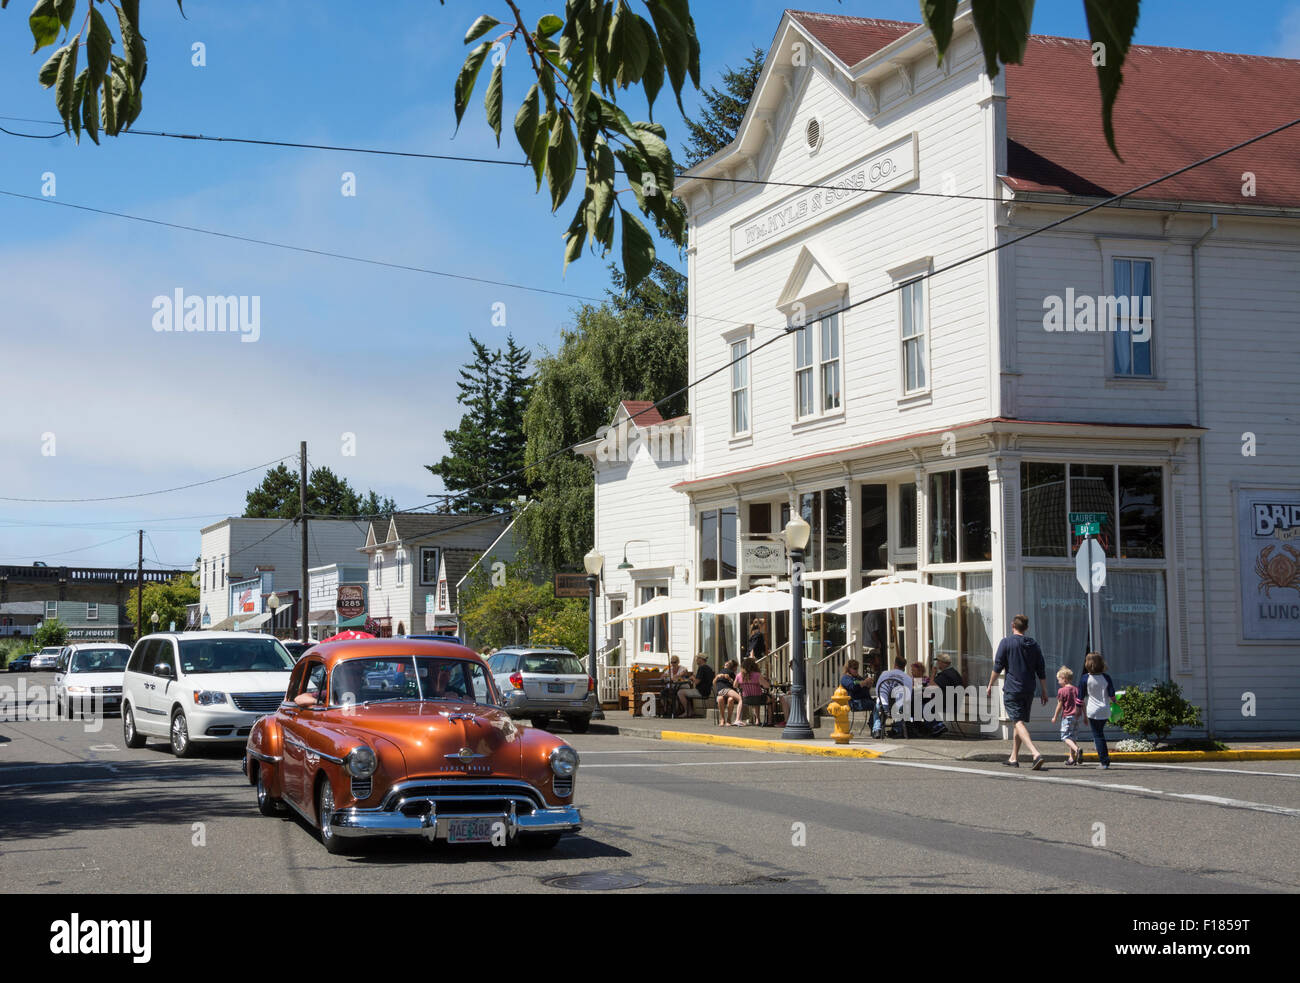 Classsic Oldsmobile cruising Bay Street in Old Town Florence on the central Oregon Coast. Stock Photo